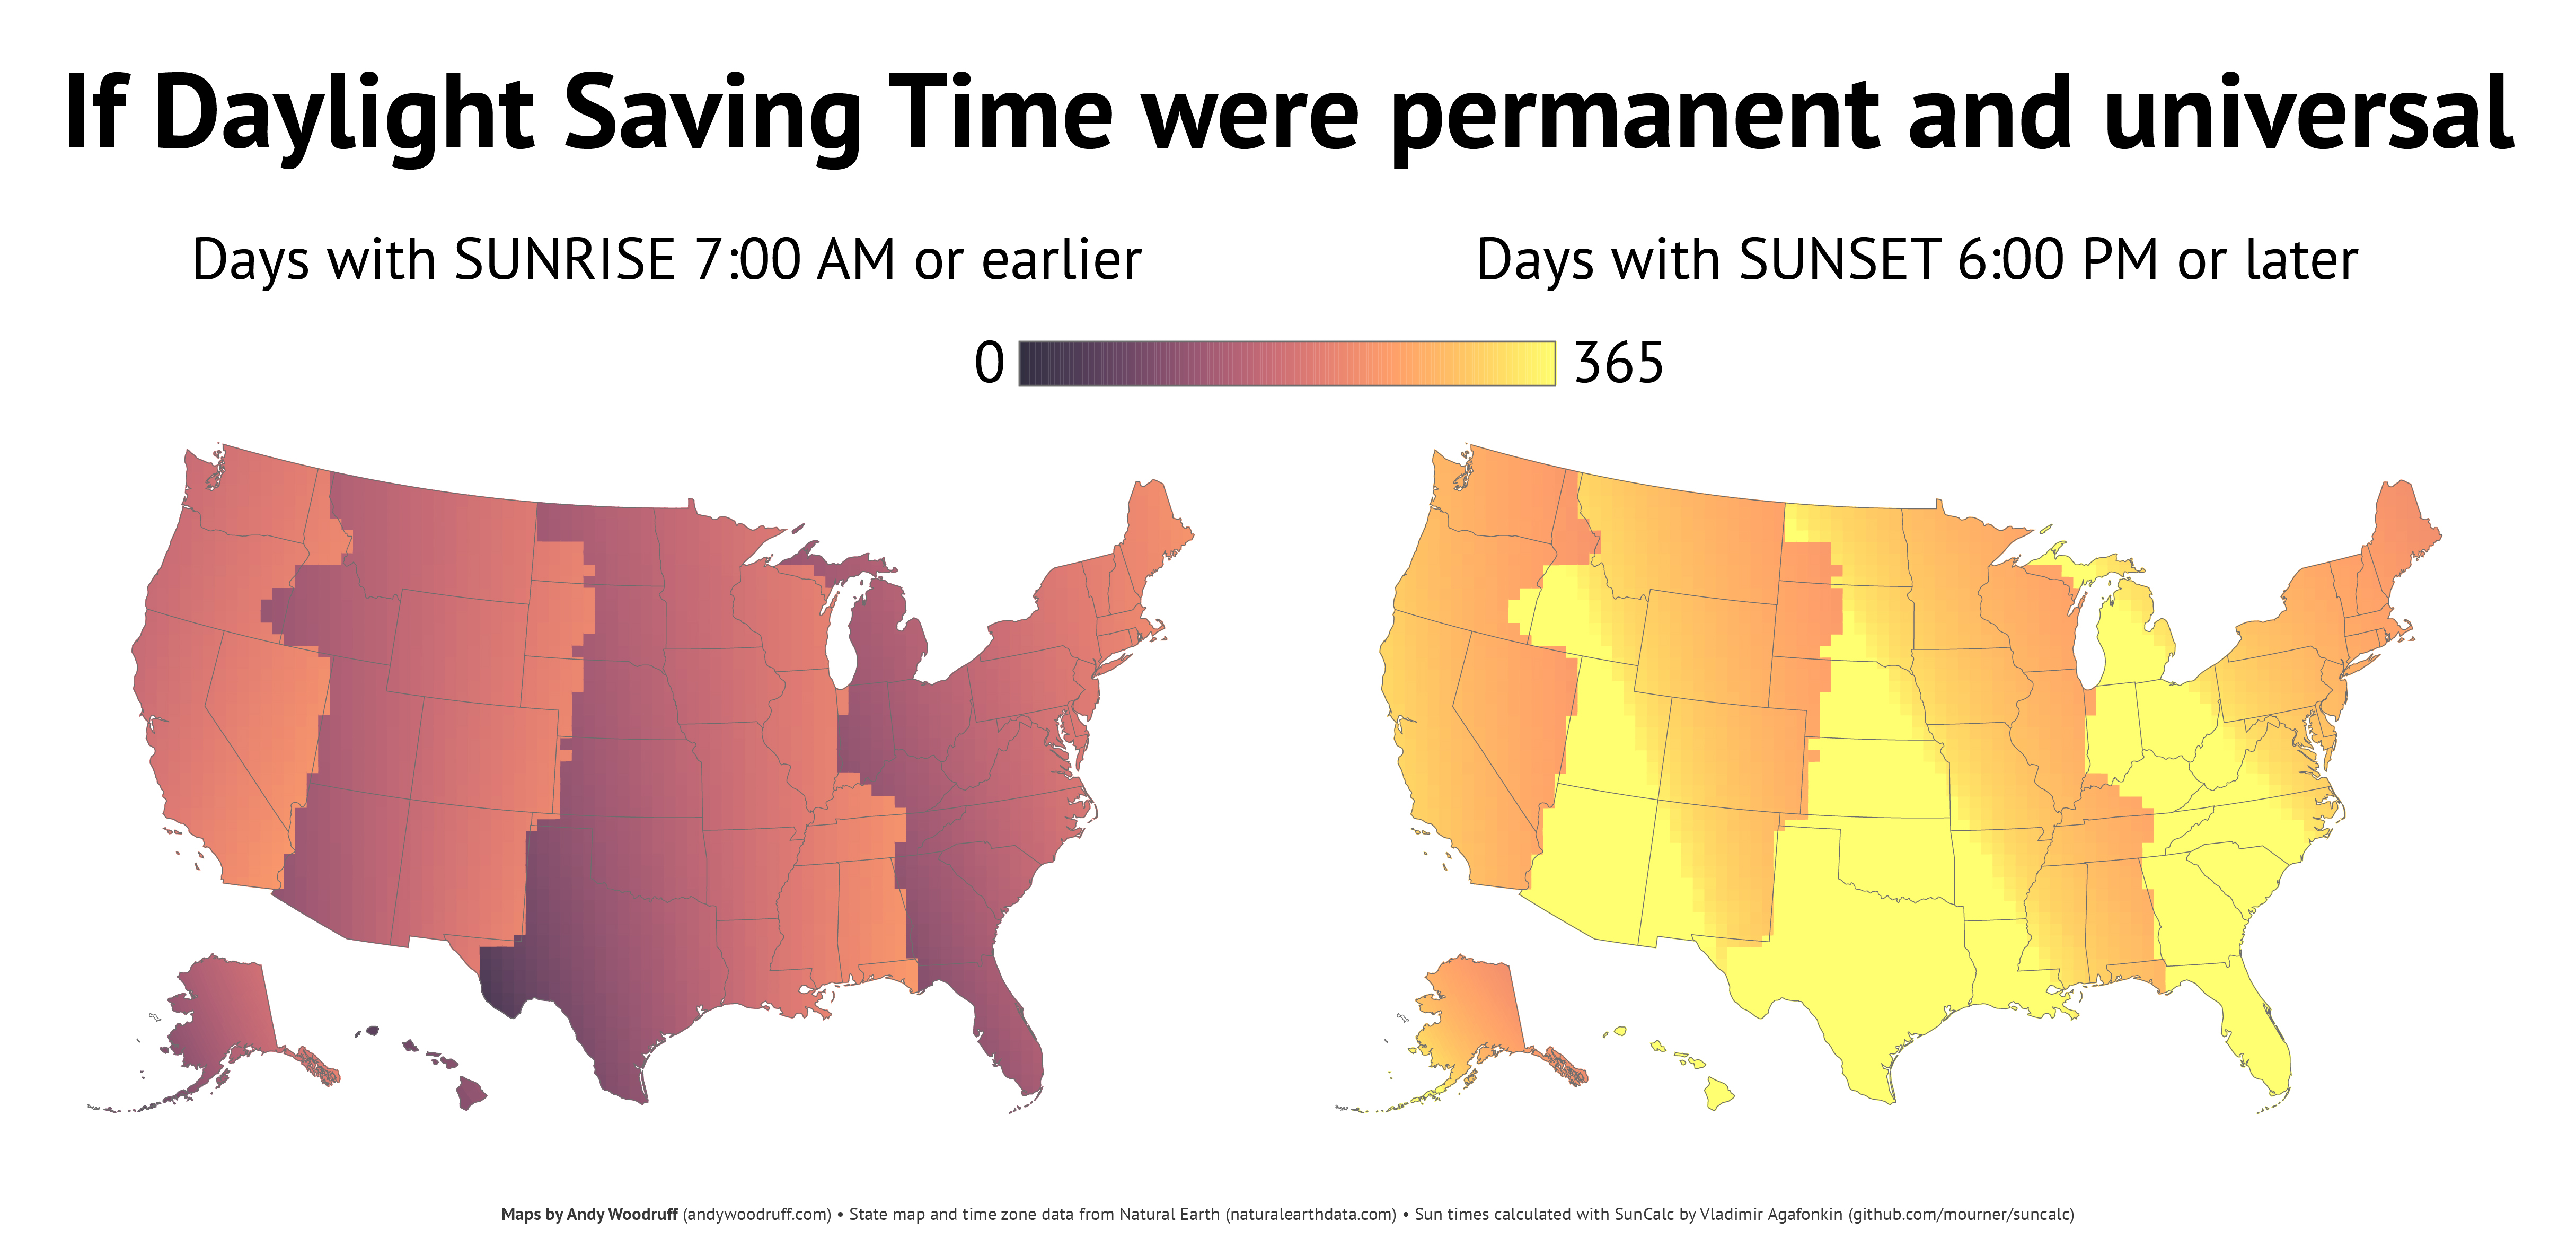 Health experts say making daylight saving time permanent is a terrible  idea. Permanent standard time, on the other hand  - The Boston Globe